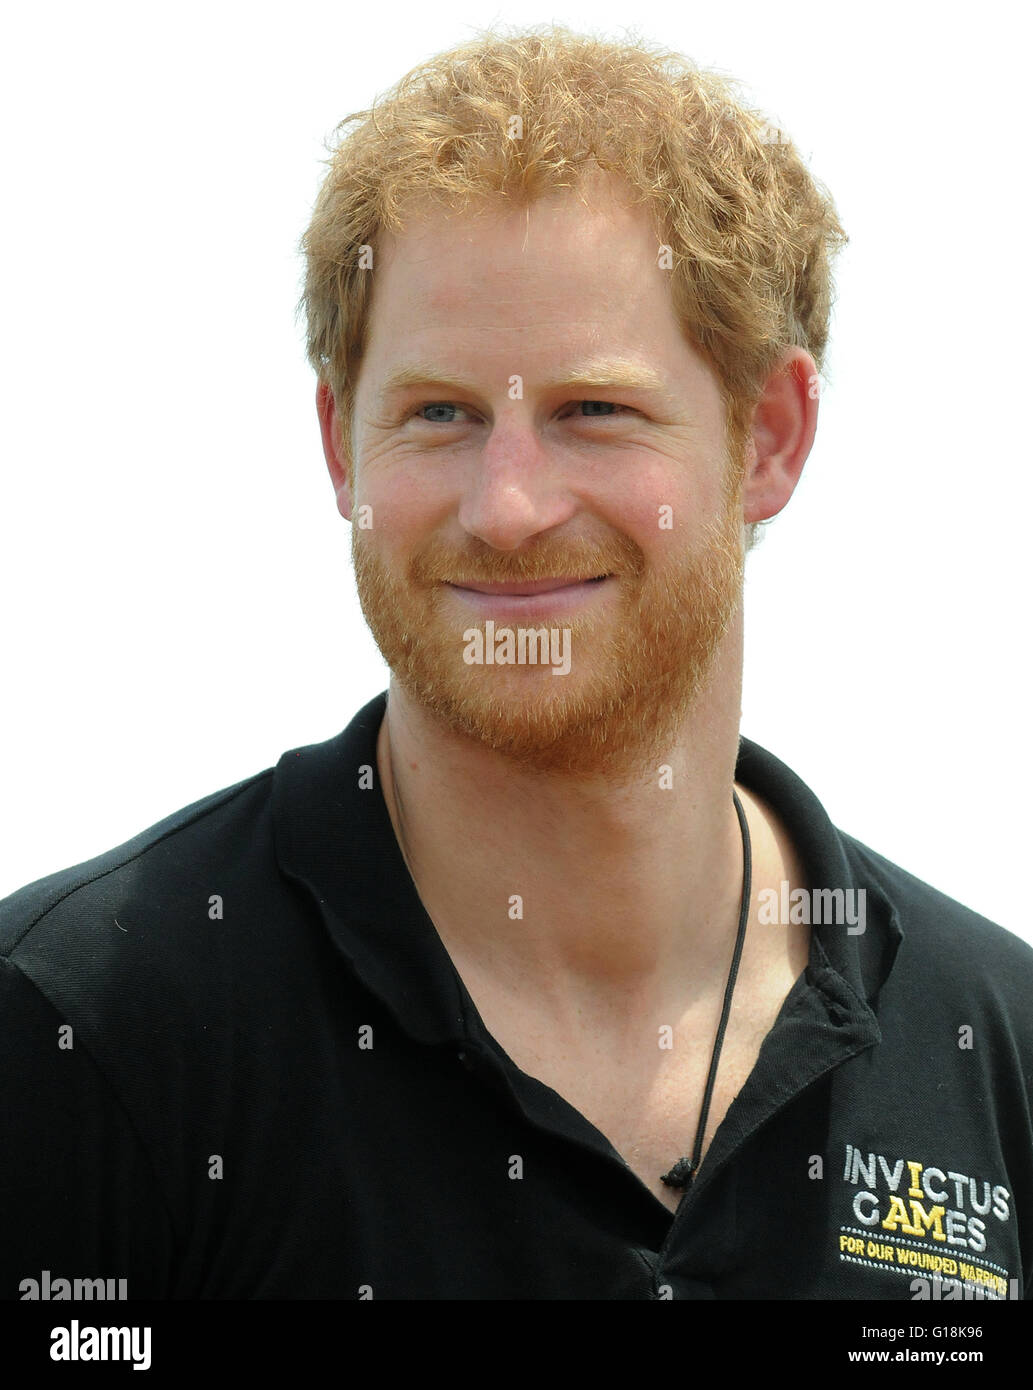 Orlando, Florida, USA. 10th May, 2016. Britain's Prince Harry smiles at spectators before participating in a medal ceremony at the 2016 Invictus Games at the ESPN Wide World of Sports Complex in Orlando, Florida on May 10, 2016. The five day multi-sport event for wounded, injured, or sick armed services personnel, includes 500 competitors from fourteen countries. Prince Harry launched the first Invictus Games in 2014 in London, England. Credit:  Paul Hennessy/Alamy Live News Stock Photo